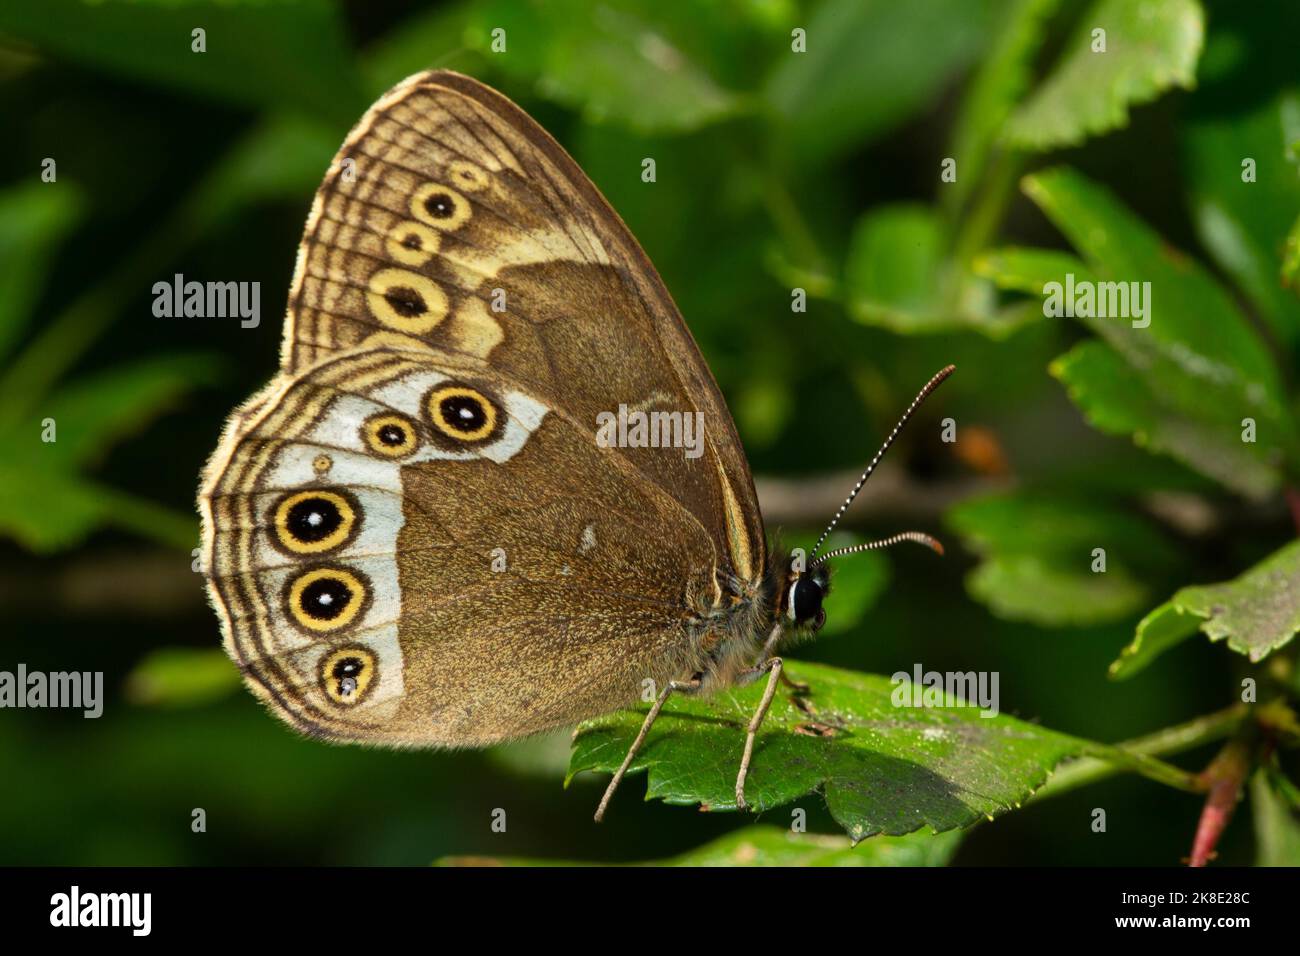 Yellow-bordered butterfly butterfly with closed wings seen on green leaf on the right Stock Photo